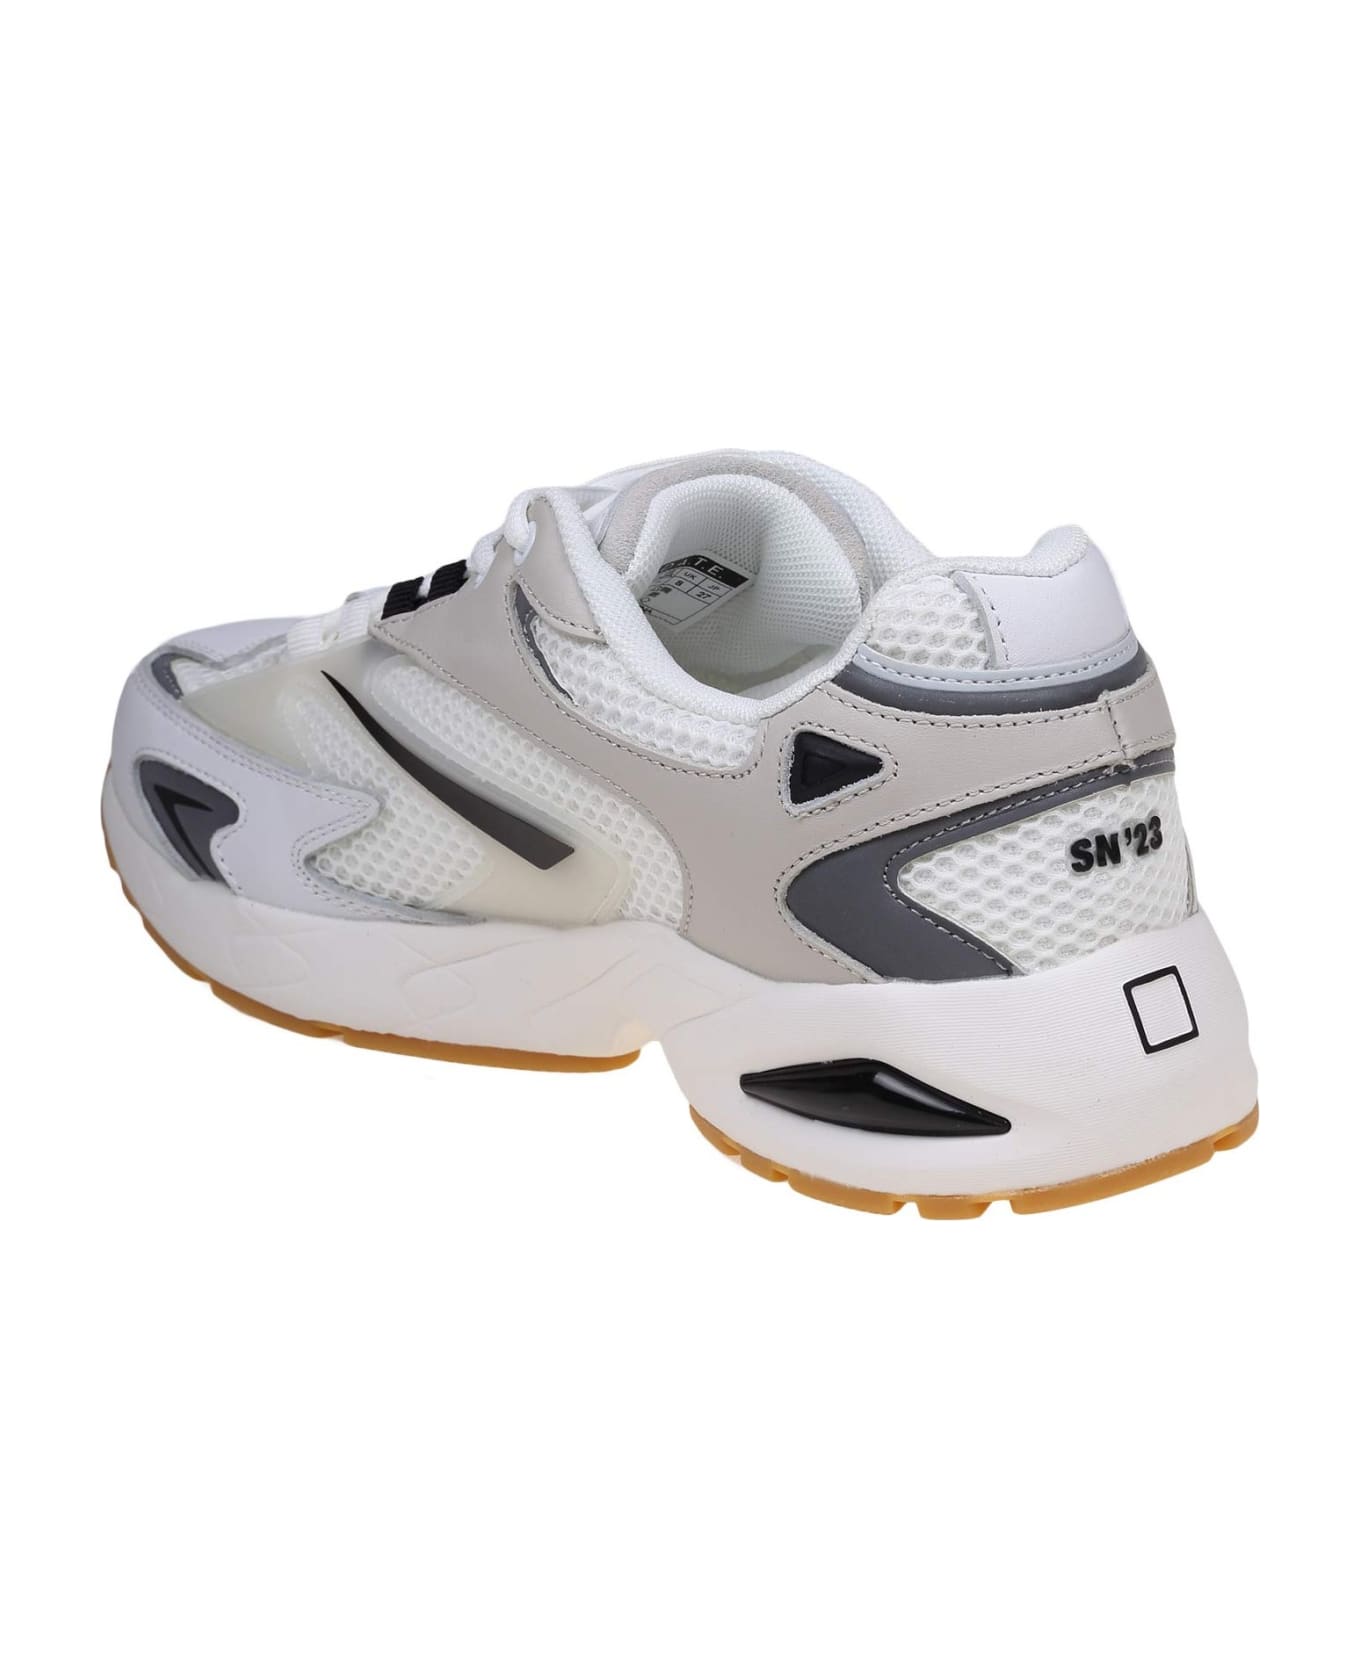 D.A.T.E. Sn23 Sneakers In White/grey Mesh And Leather - White/Grey